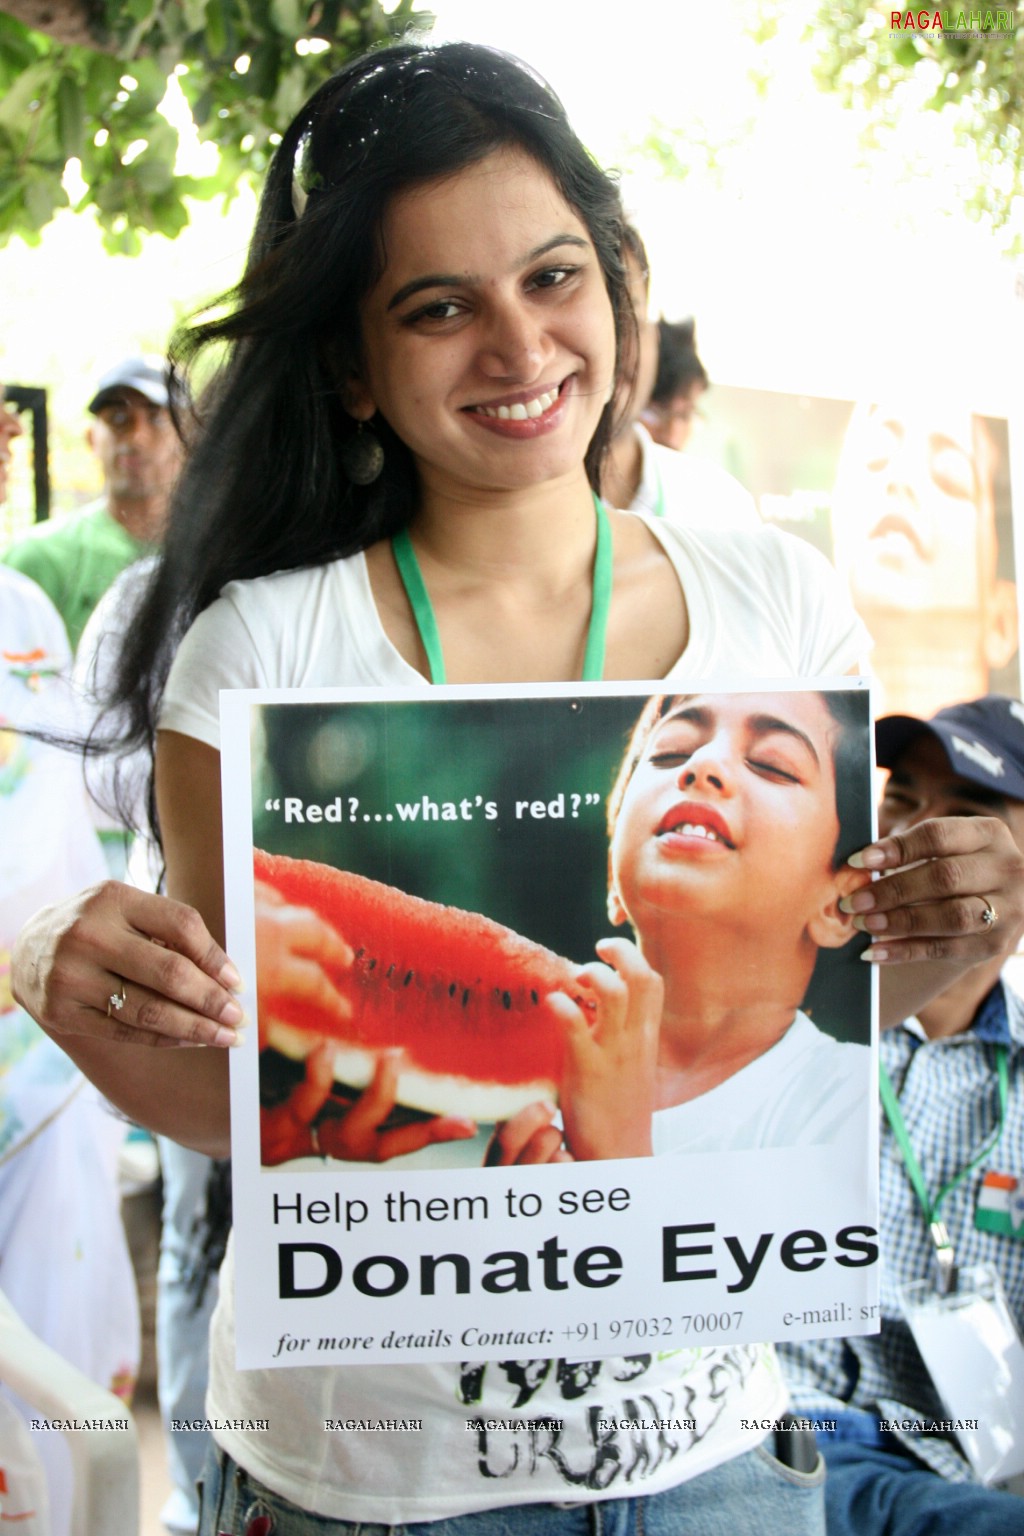 Pledge to Donate Eyes by 'Littleways Foundation'